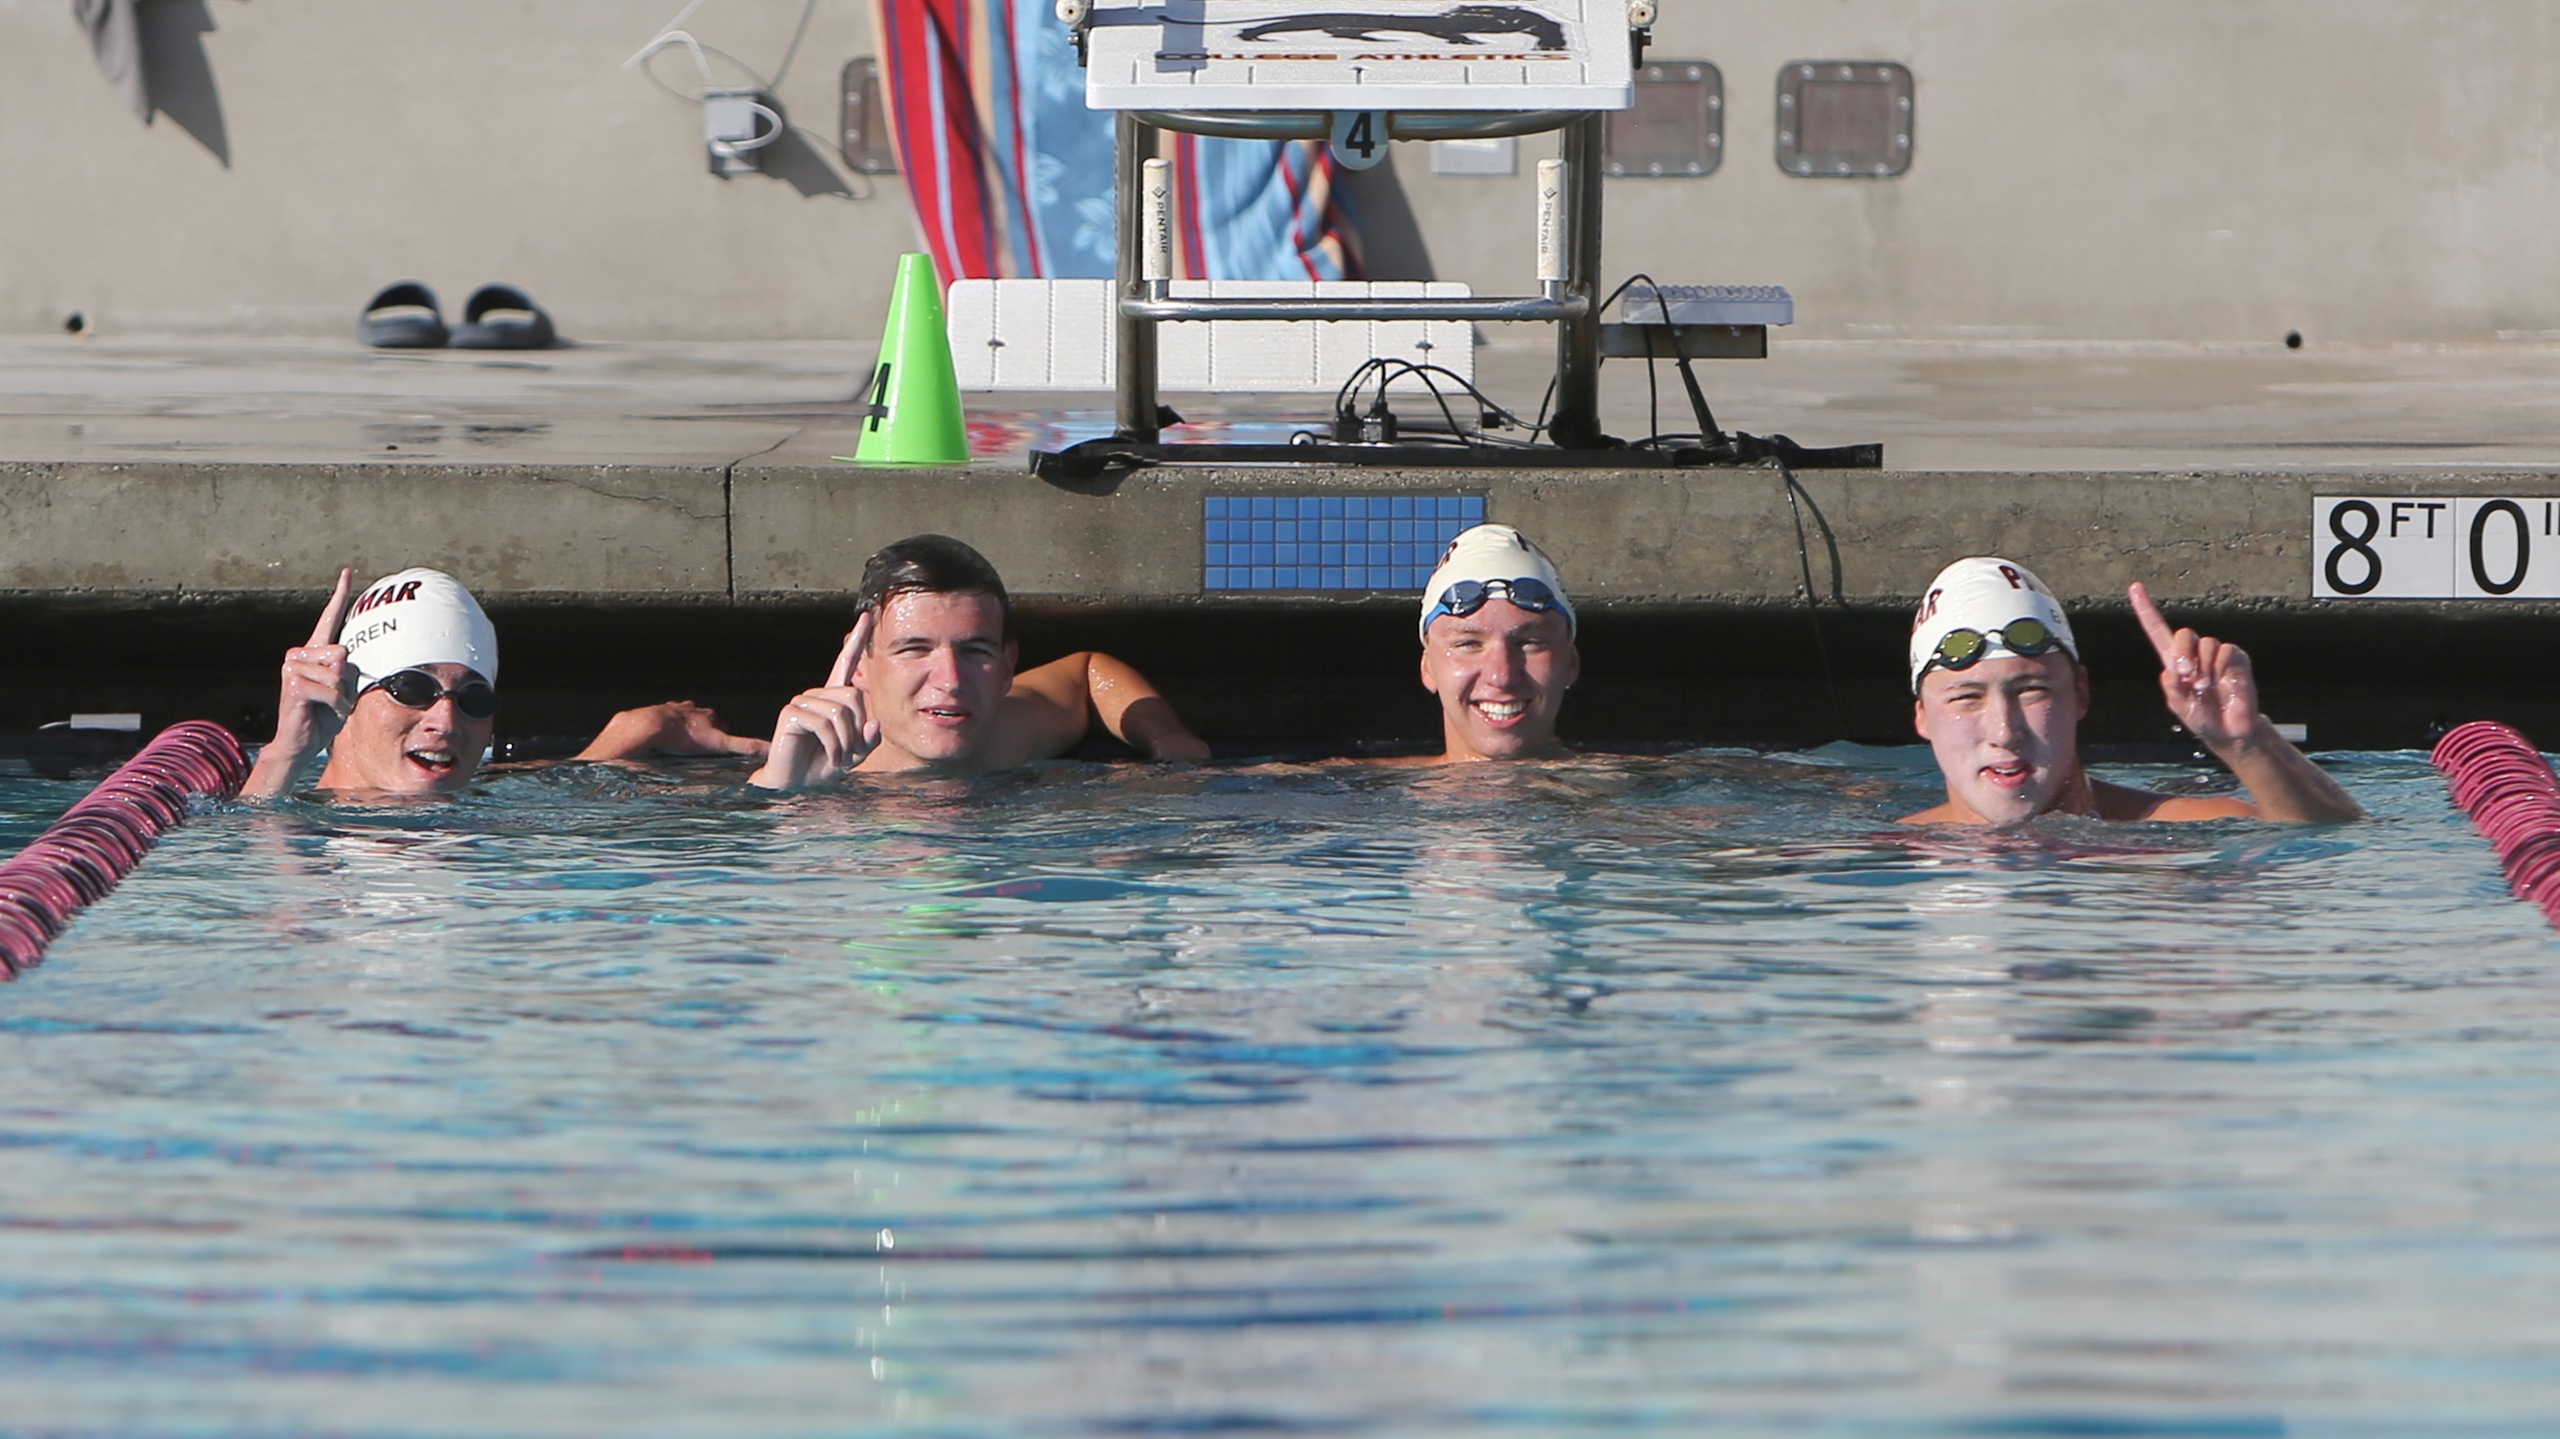 Palomar's men's relay team finished in first place with an impressive time of 3:32.79. Photo by Hugh Cox.